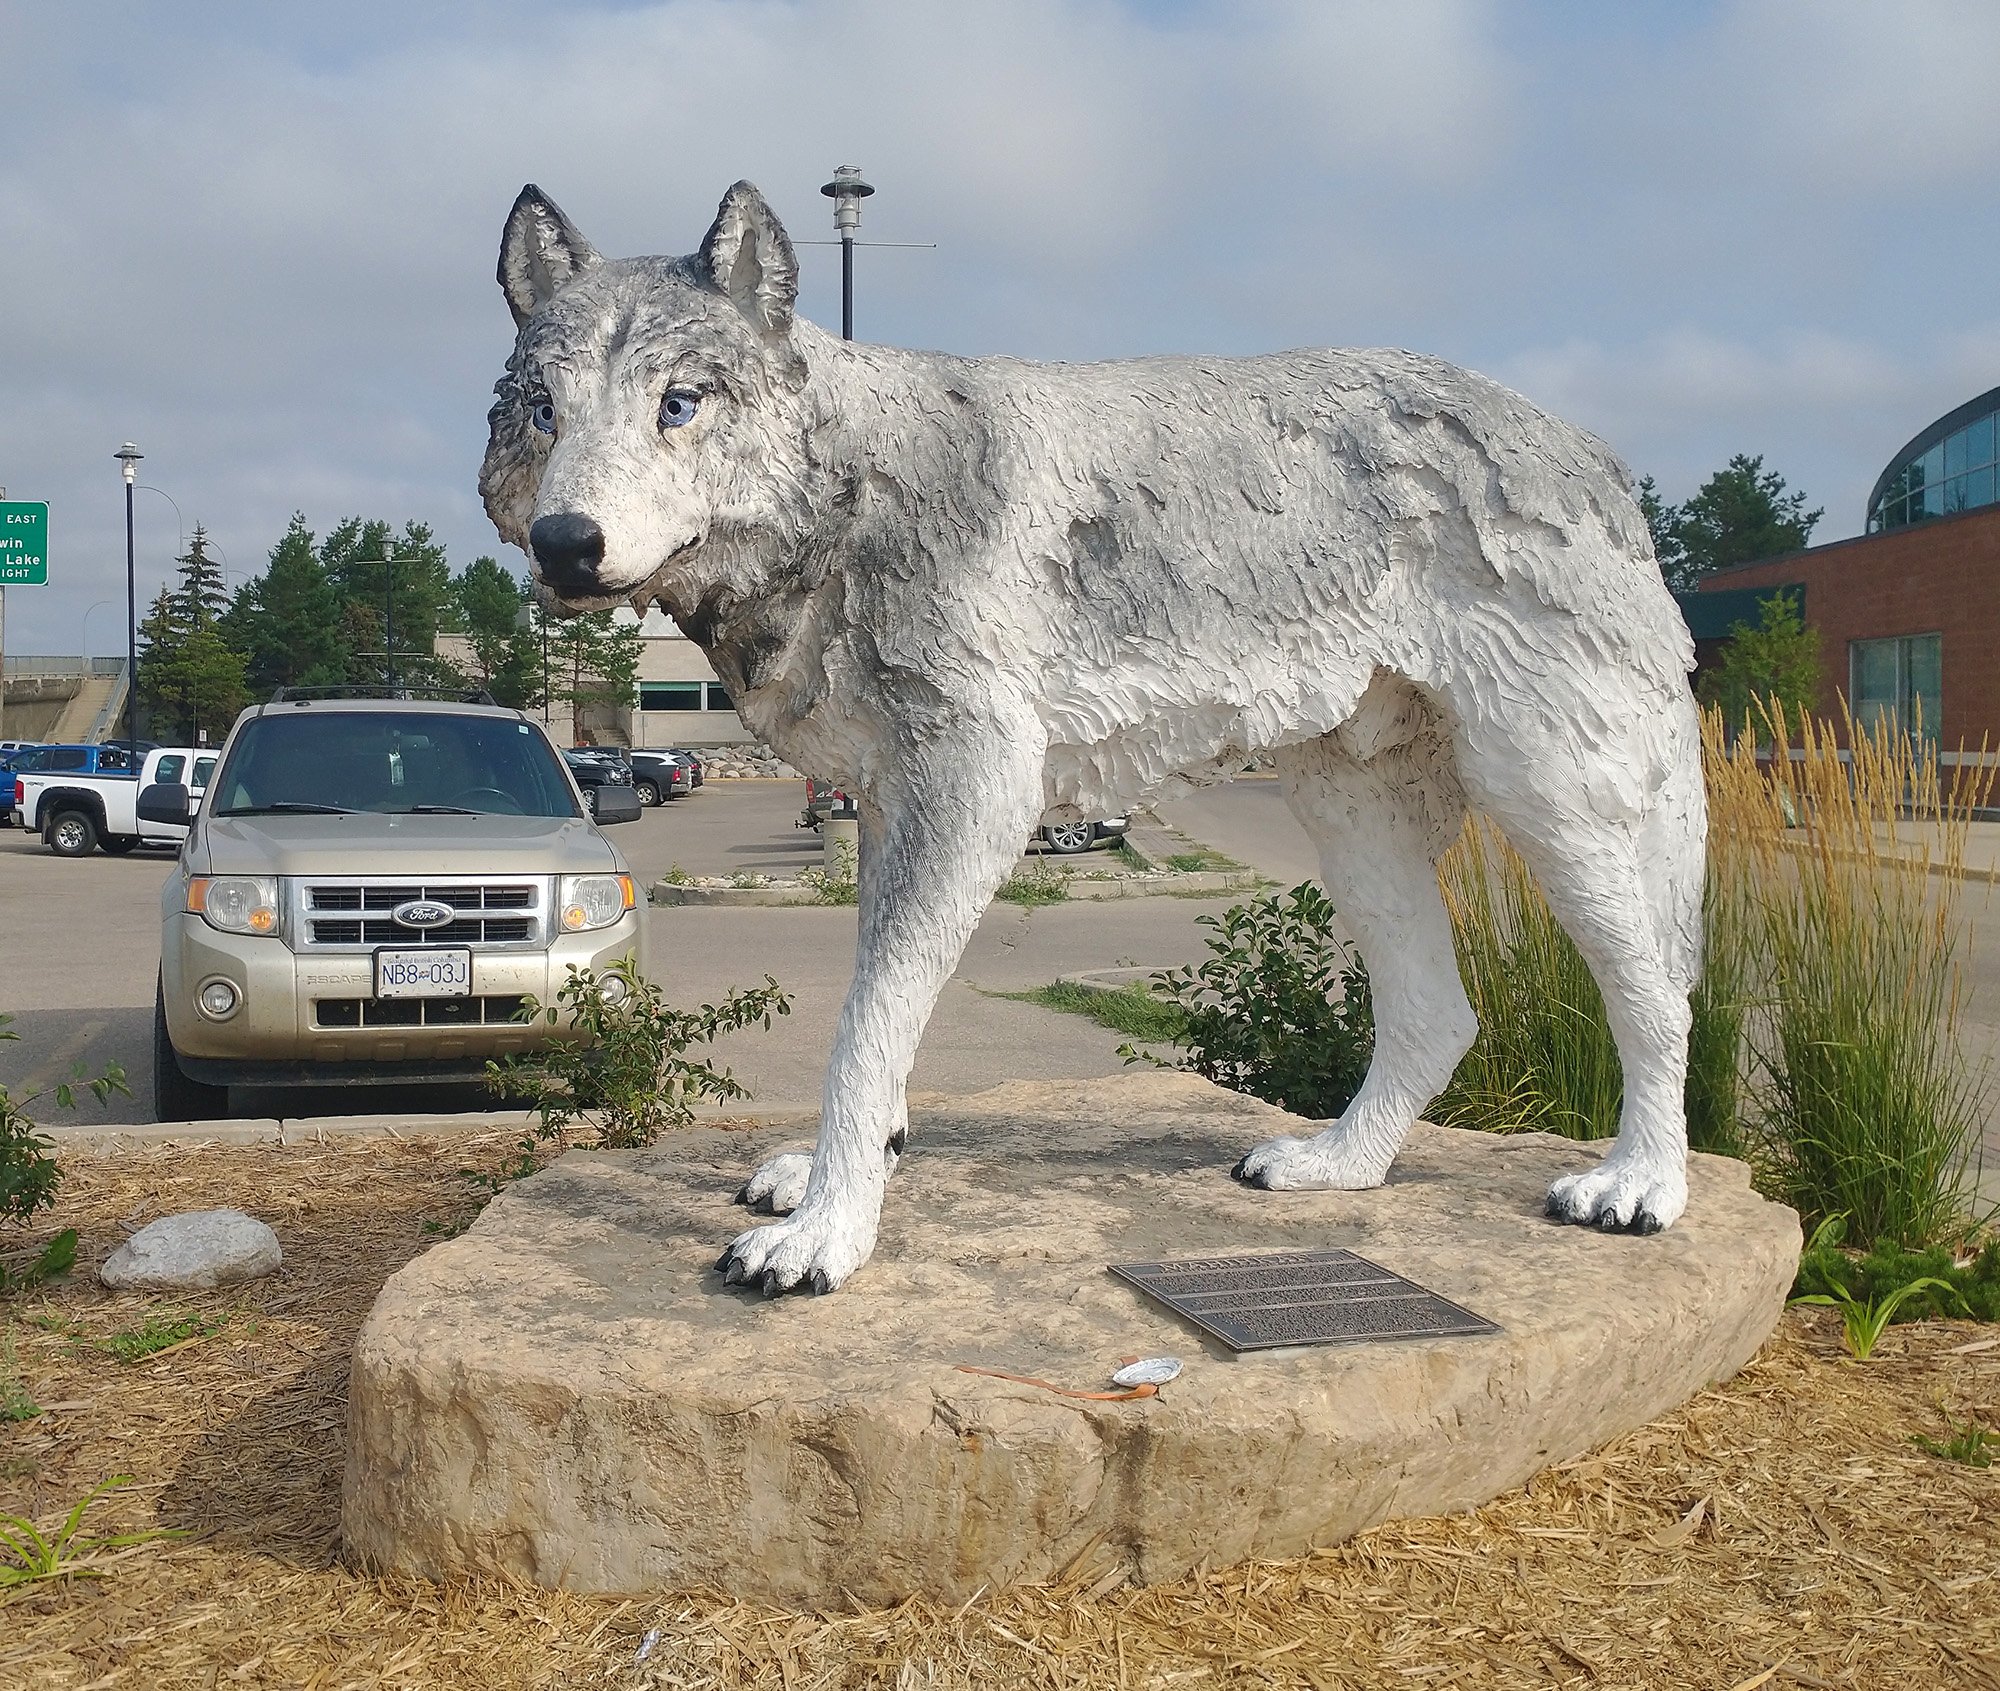 Big wolf statue in Prince Albert, the city I stayed at the previous night.